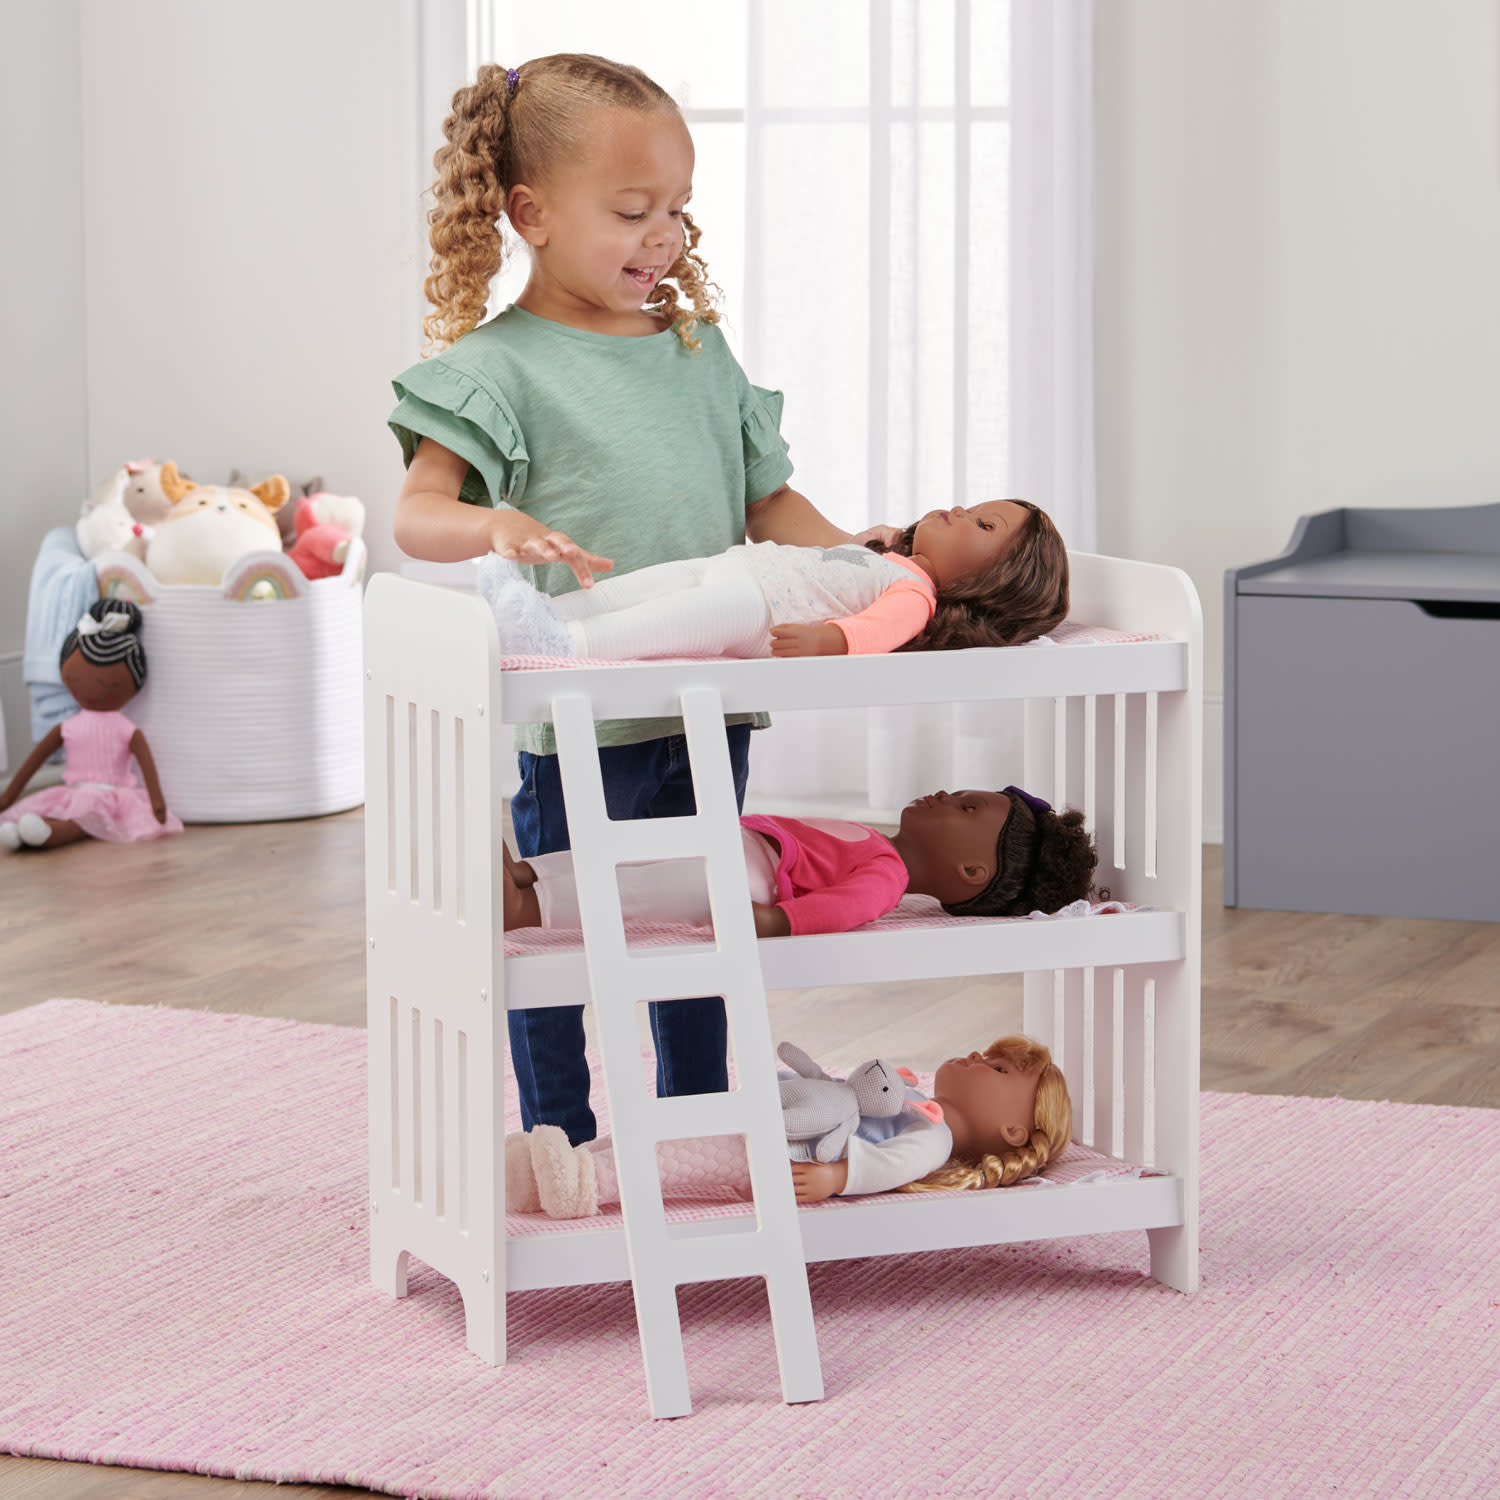 Badger Basket Triple Doll Bunk Bed with Ladder, Bedding, and Free Personalization Kit - Pink Gingham - image 3 of 12